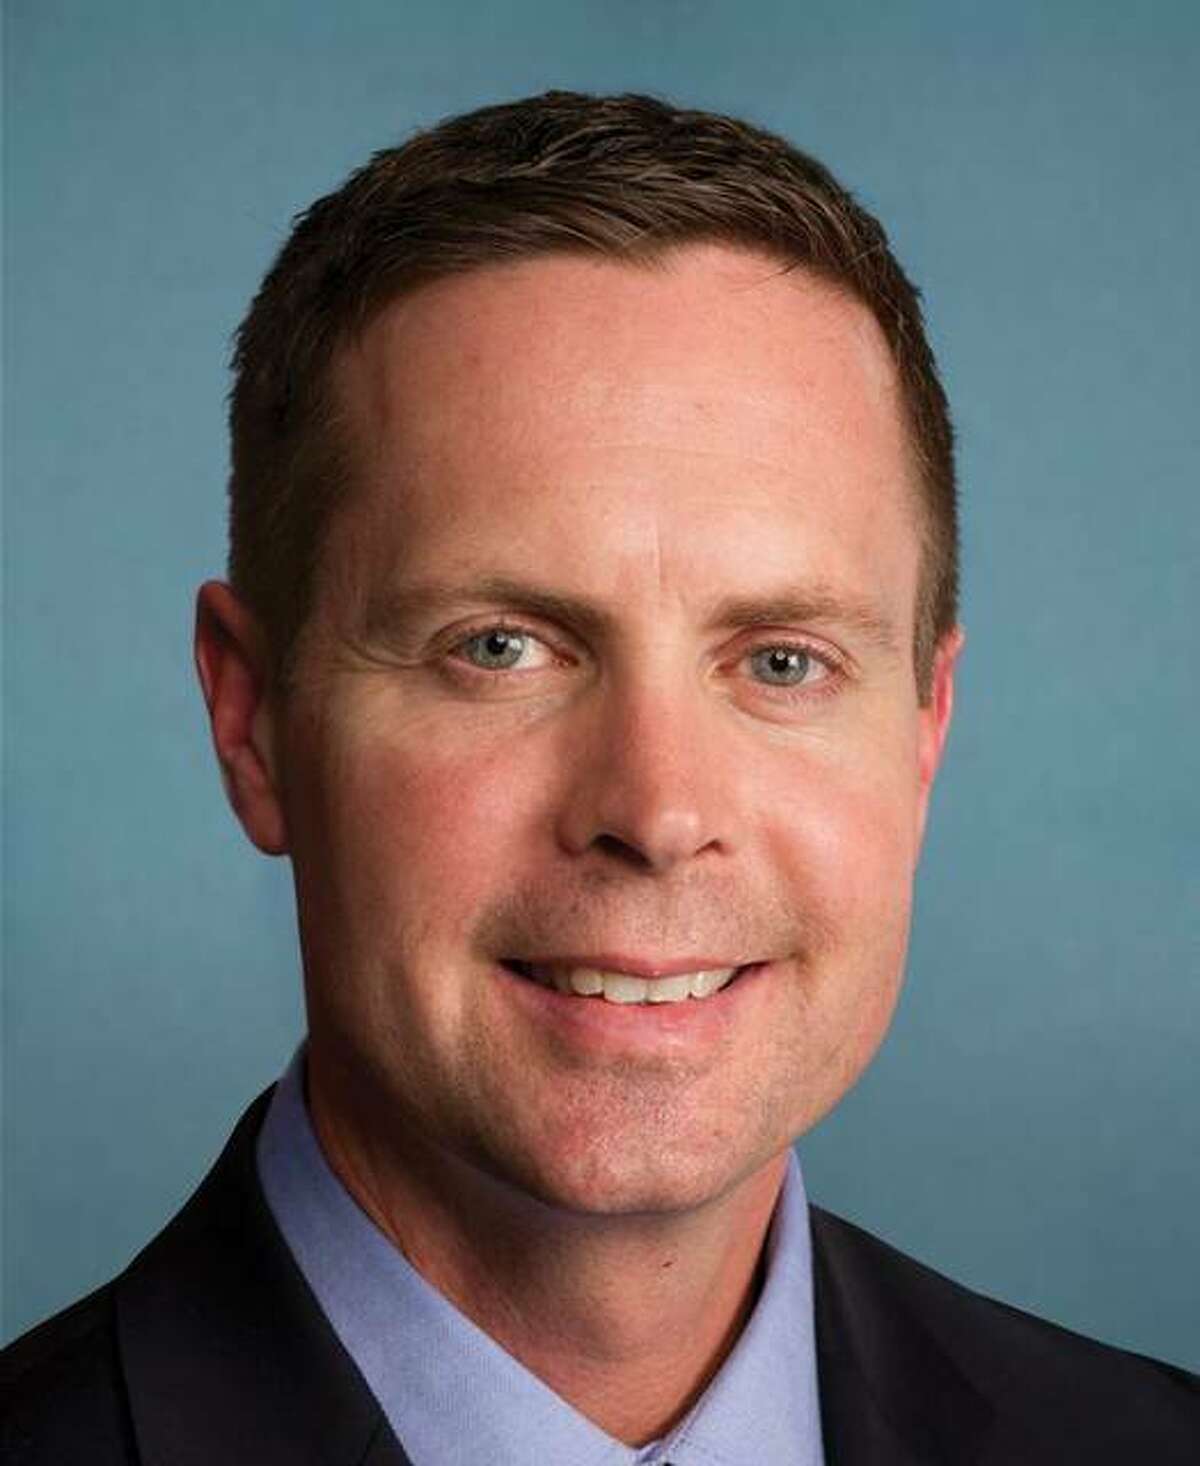 U.S. Rep. Rodney Davis, R-Taylorville, will seek re-election, running next year in the redrawn 15th Congressional District.